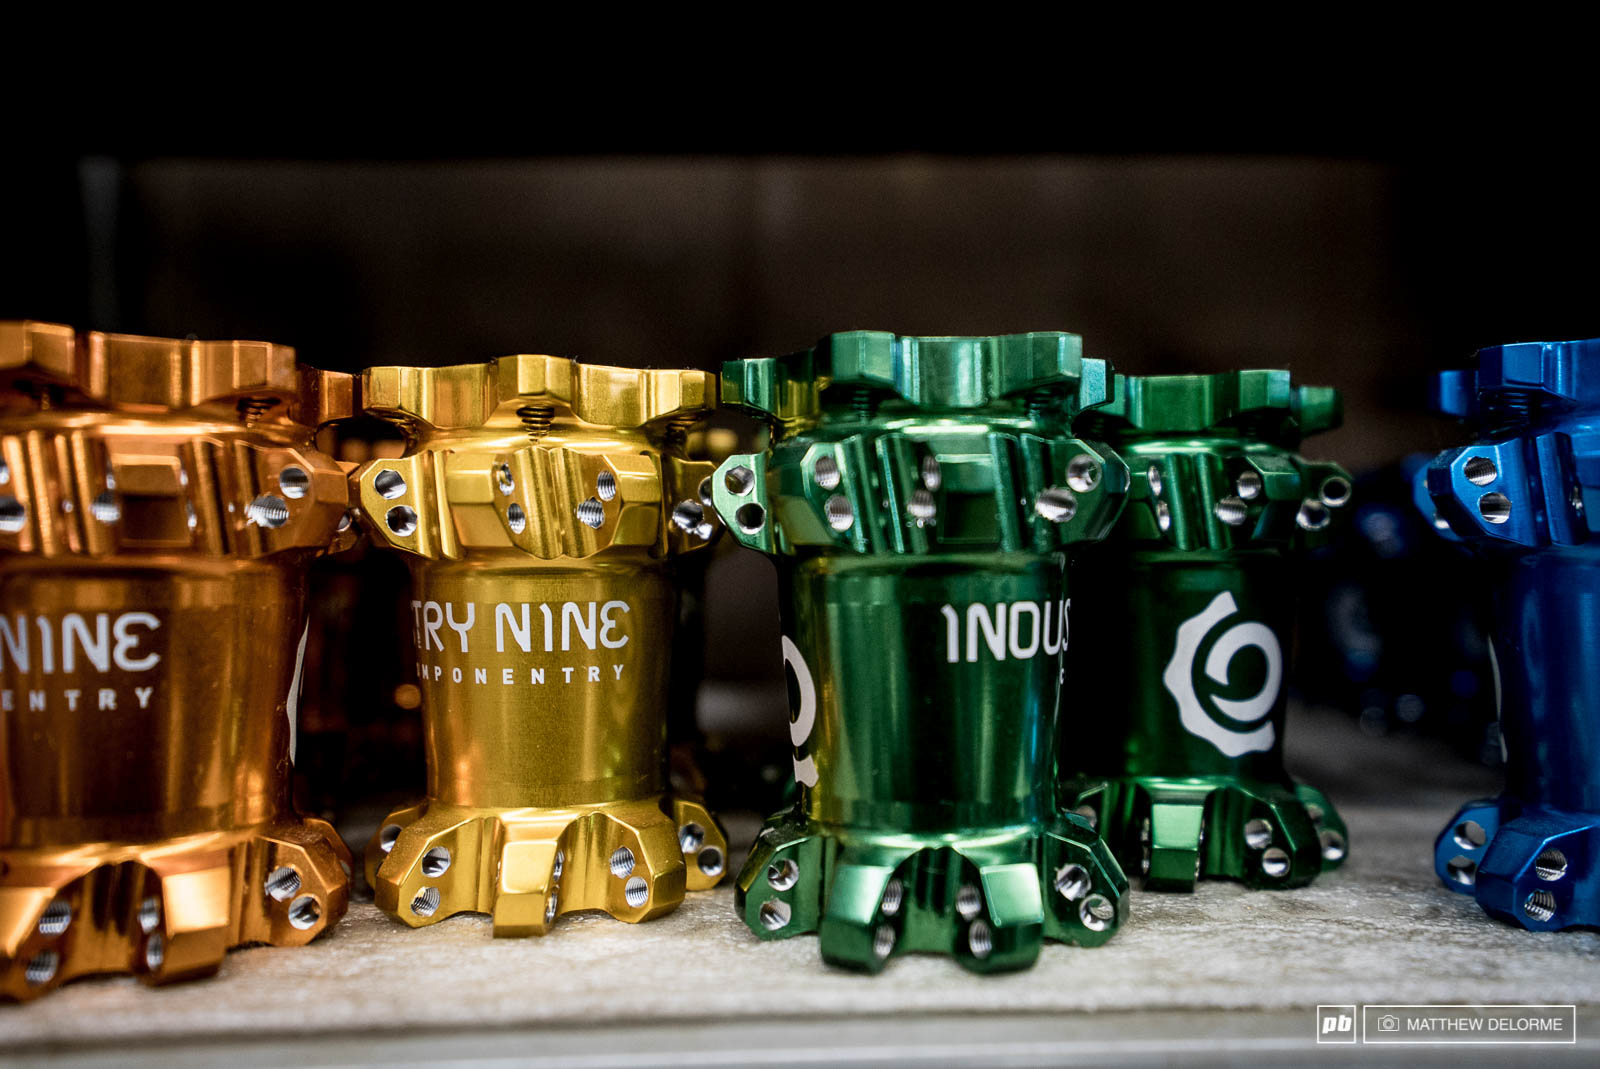 Taste the rainbow. Some incredible bling for your bike, Industry Nine hubs are really quite beautiful to look at. They happen to work pretty well, too.